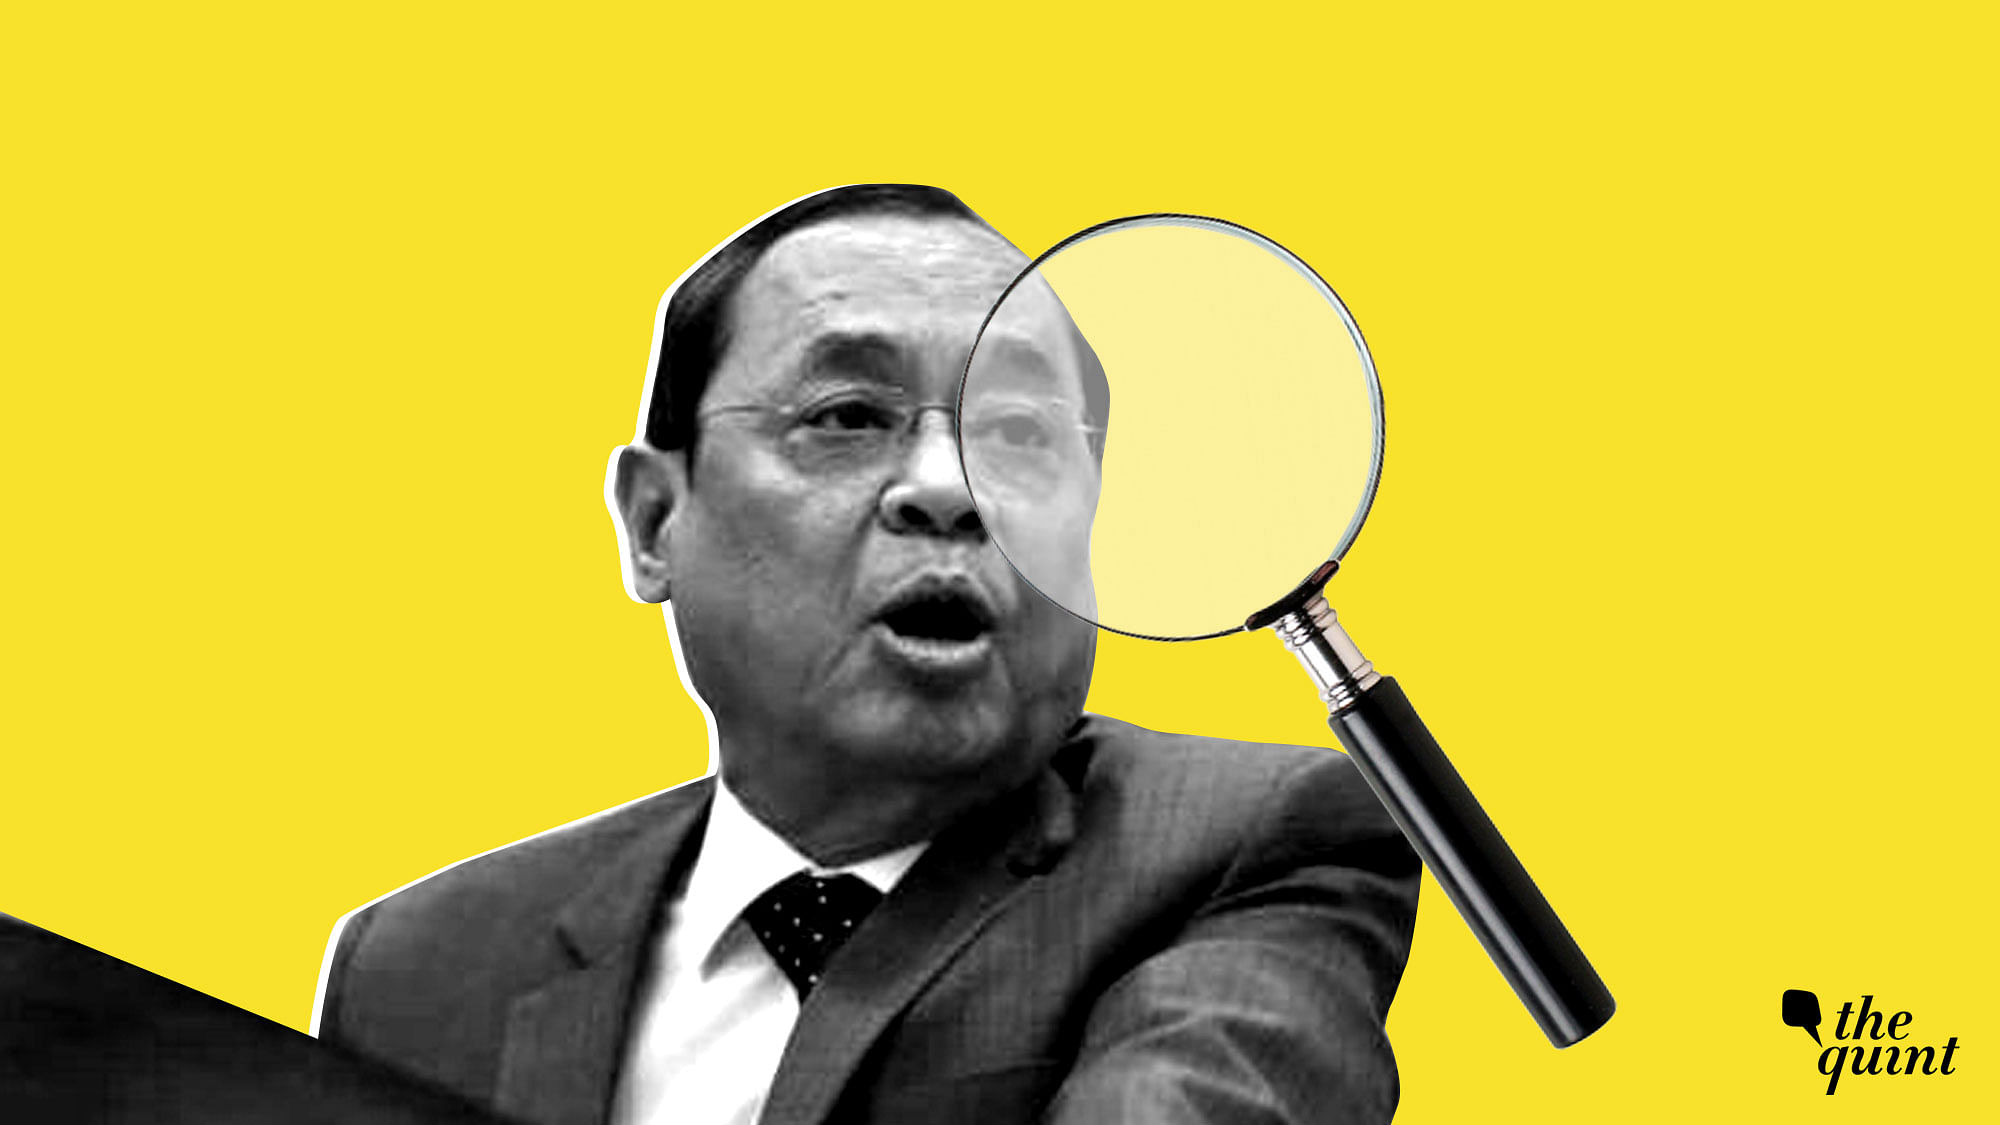 Gogoi got a clean chit from SC’s In-House Committee in allegations of sexual harassment against him.